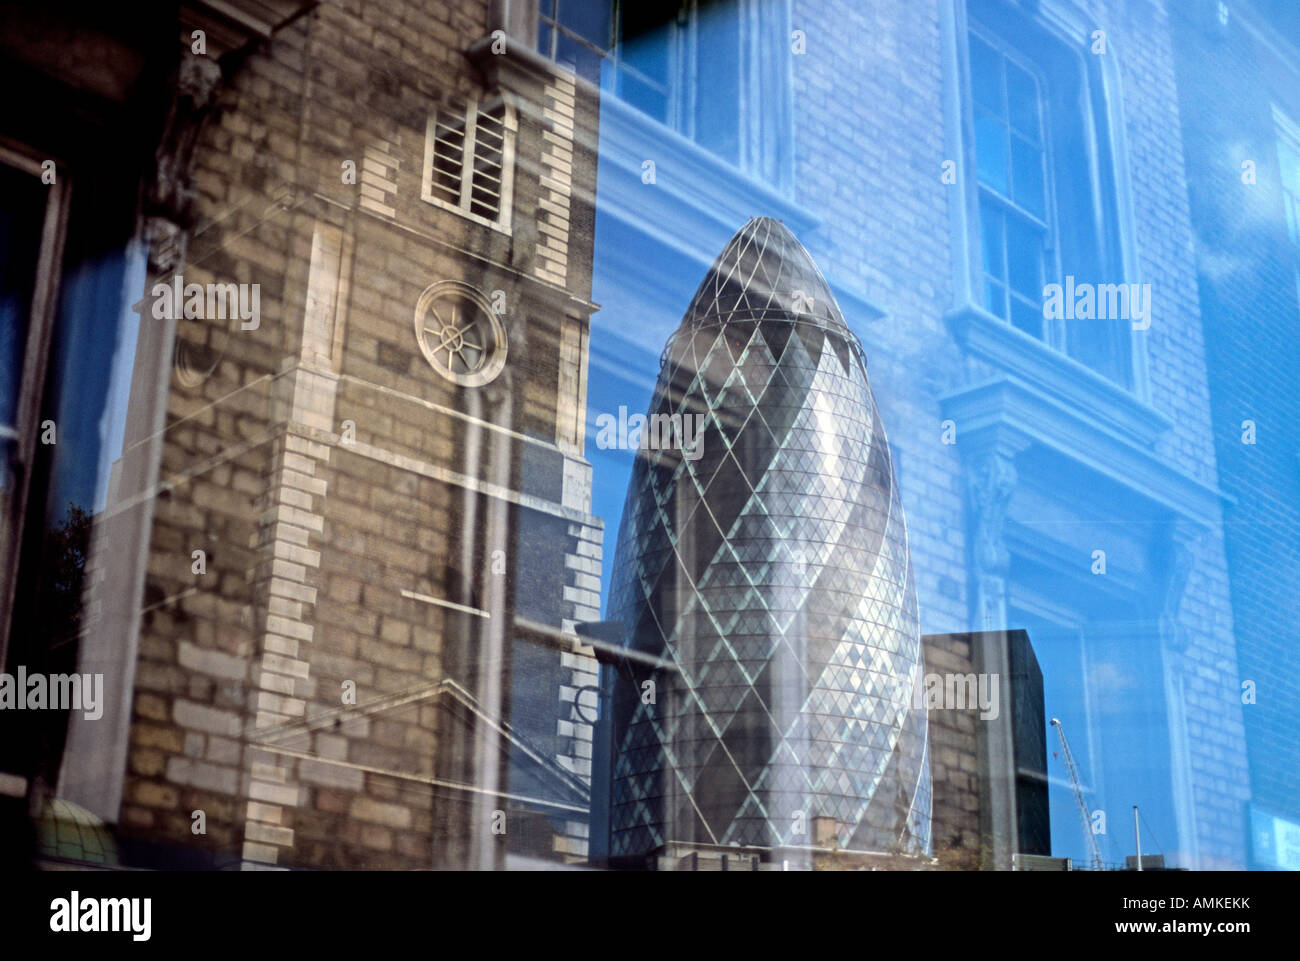 Contrasting styles of London architecture: reflections of the Swiss Re 'Gherkin' building and St Botolph's church, Aldgate. Stock Photo